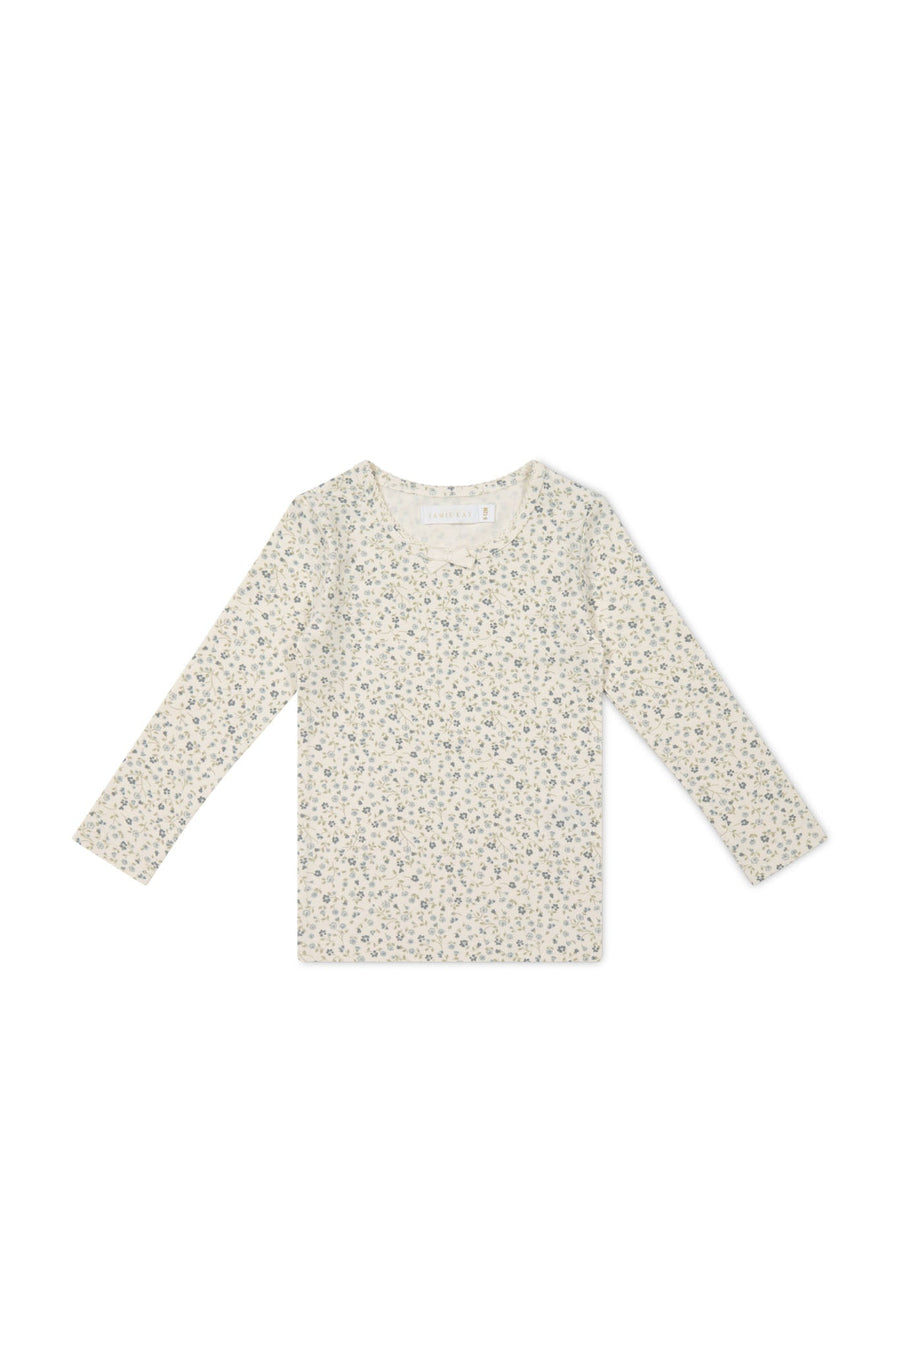 Organic Cotton Long Sleeve Top - Dainty Egret Blues Childrens Top from Jamie Kay USA